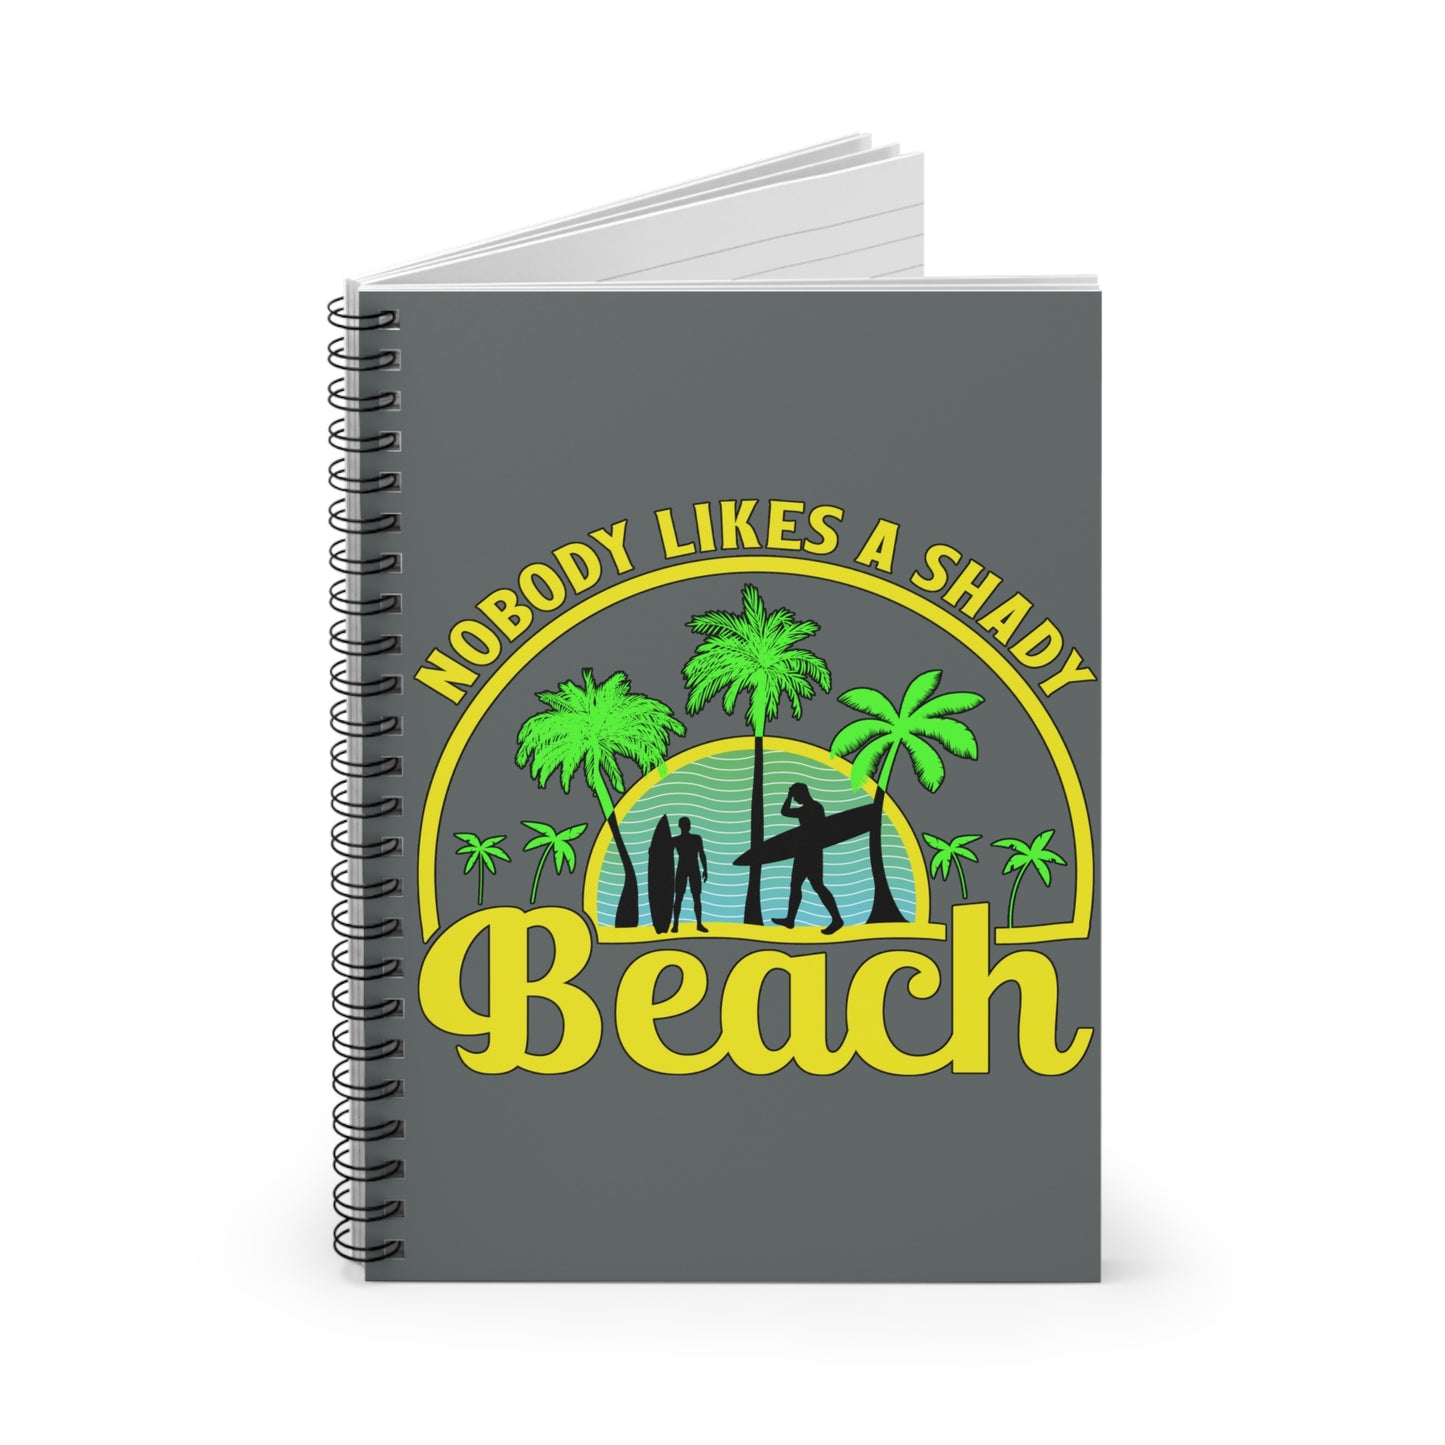 Shady Beach: Spiral Notebook - Log Books - Journals - Diaries - and More Custom Printed by TheGlassyLass.com